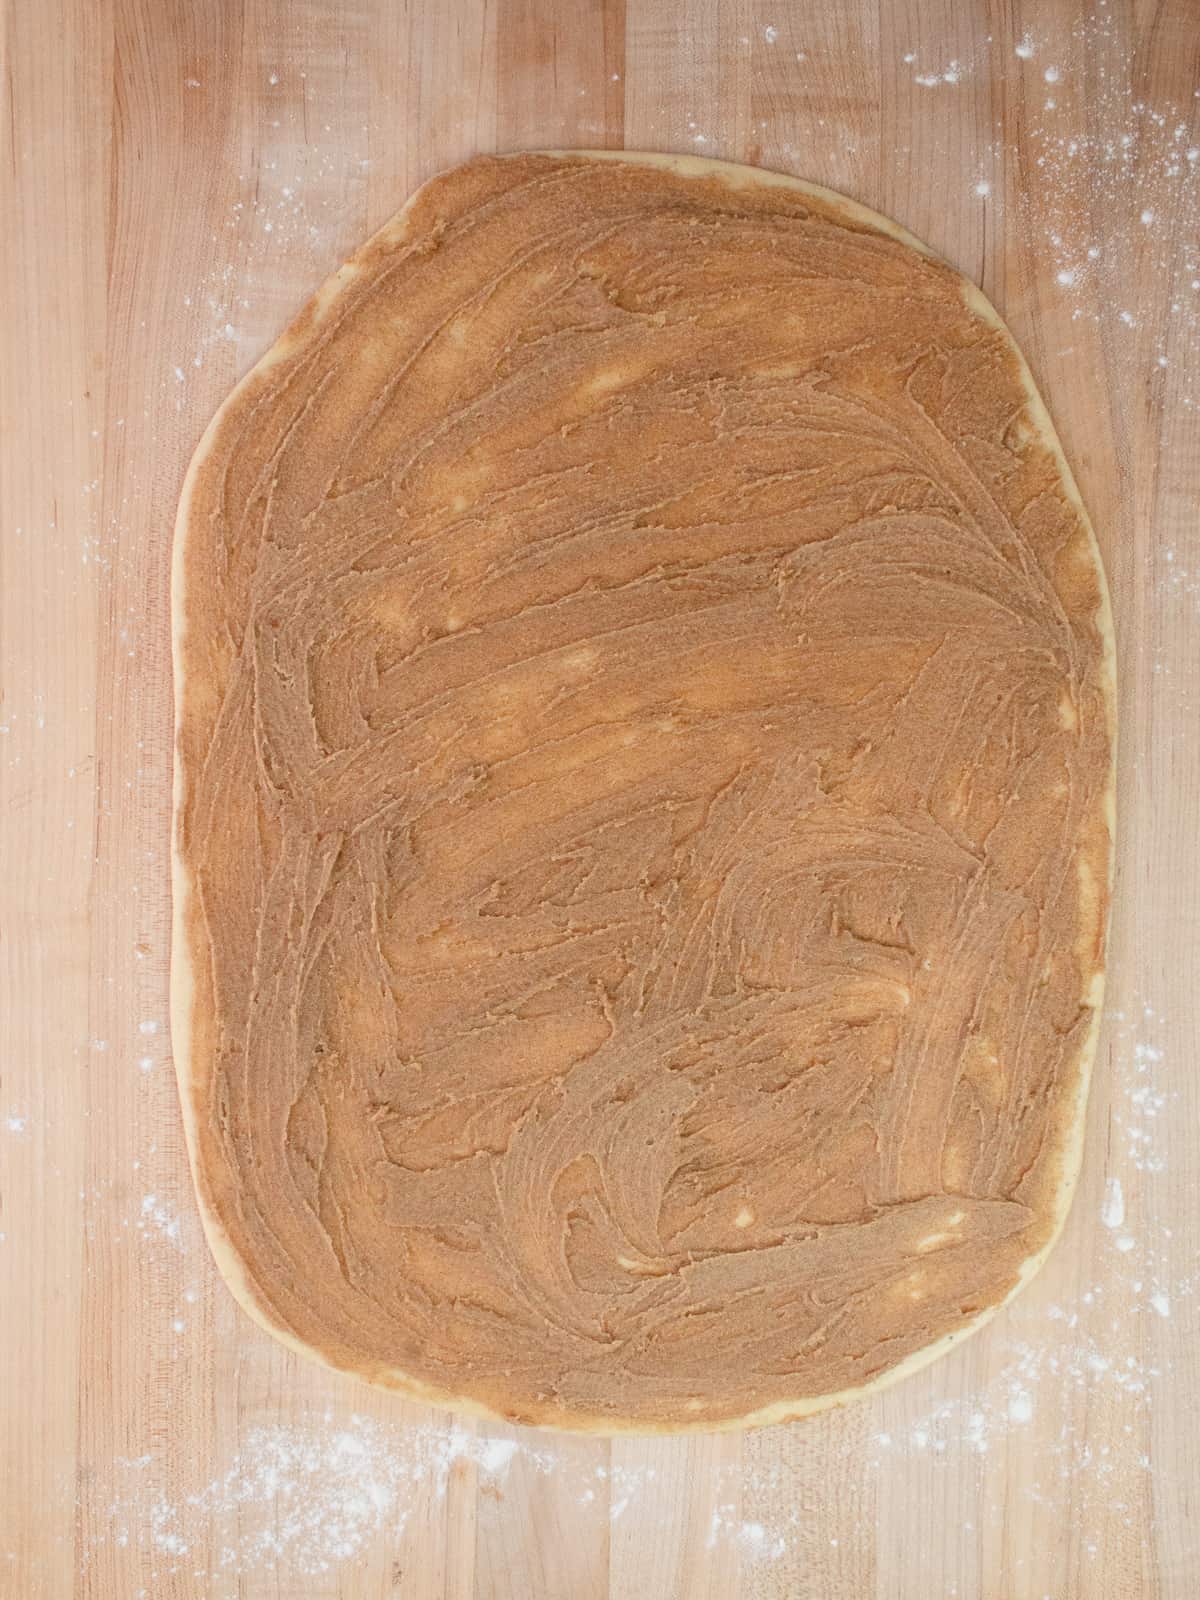 Dough rolled into a rectangle and has a layer of cinnamon filling on top